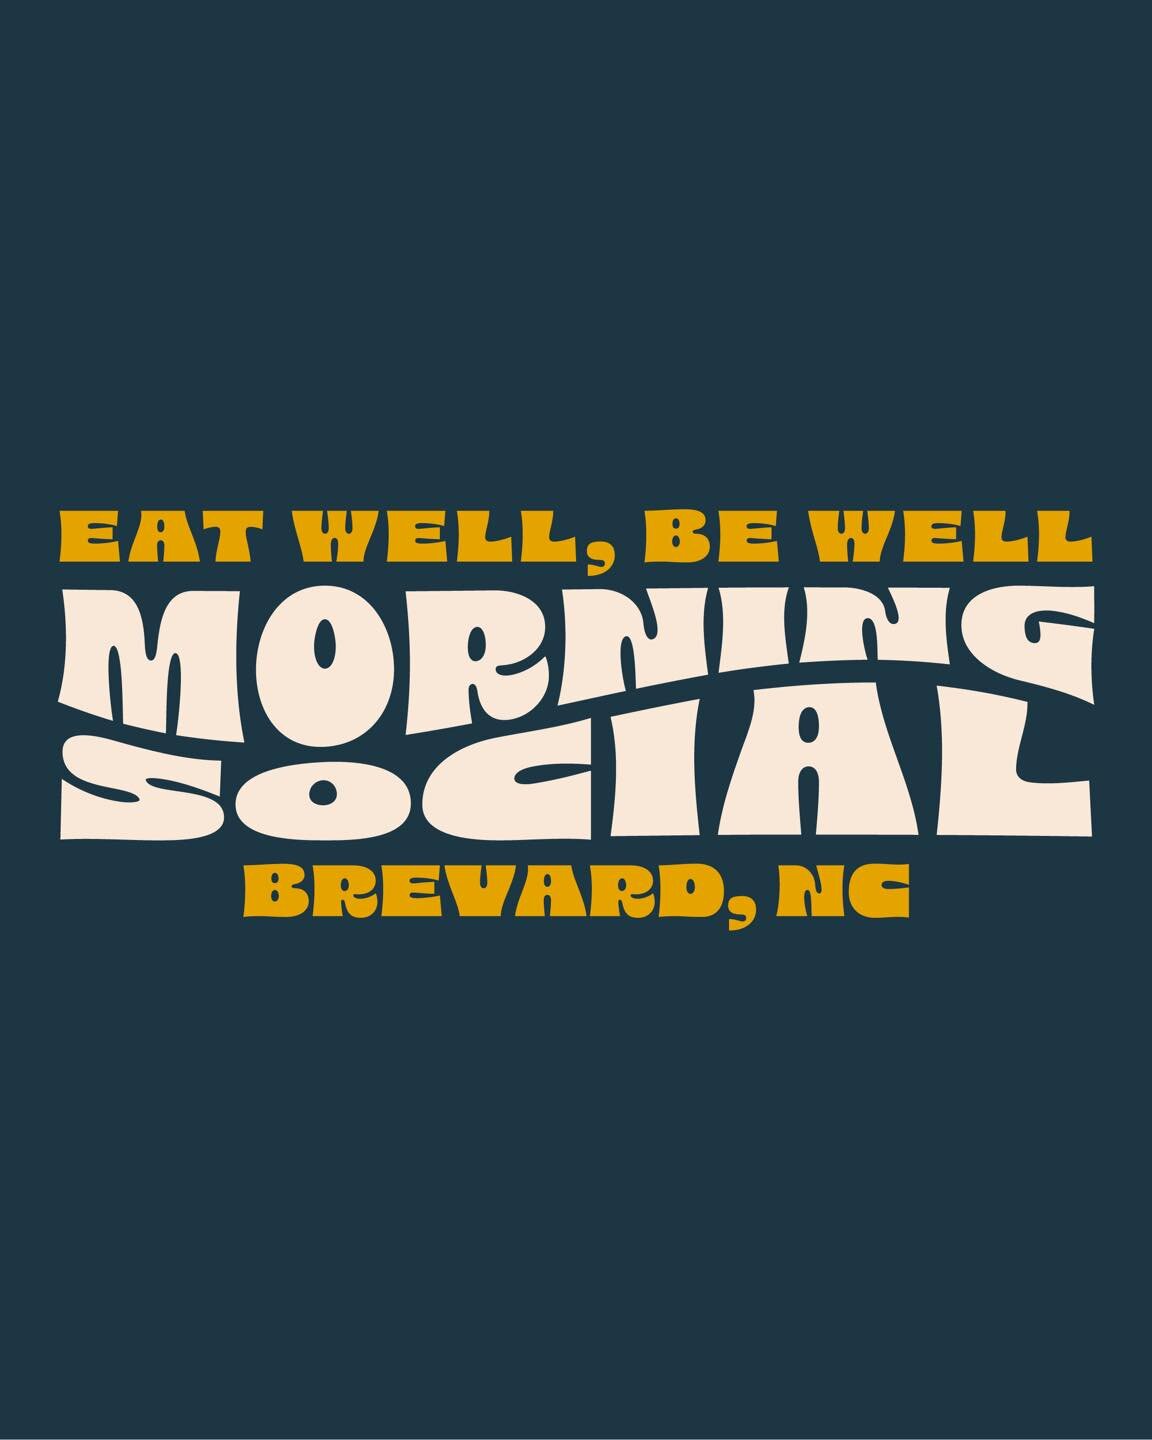 Here&rsquo;s a closer look at one of my recent merch designs for Morning Social! I had such a blast working on this project. If you&rsquo;re in Brevard, get by there and getcha some breakfast.